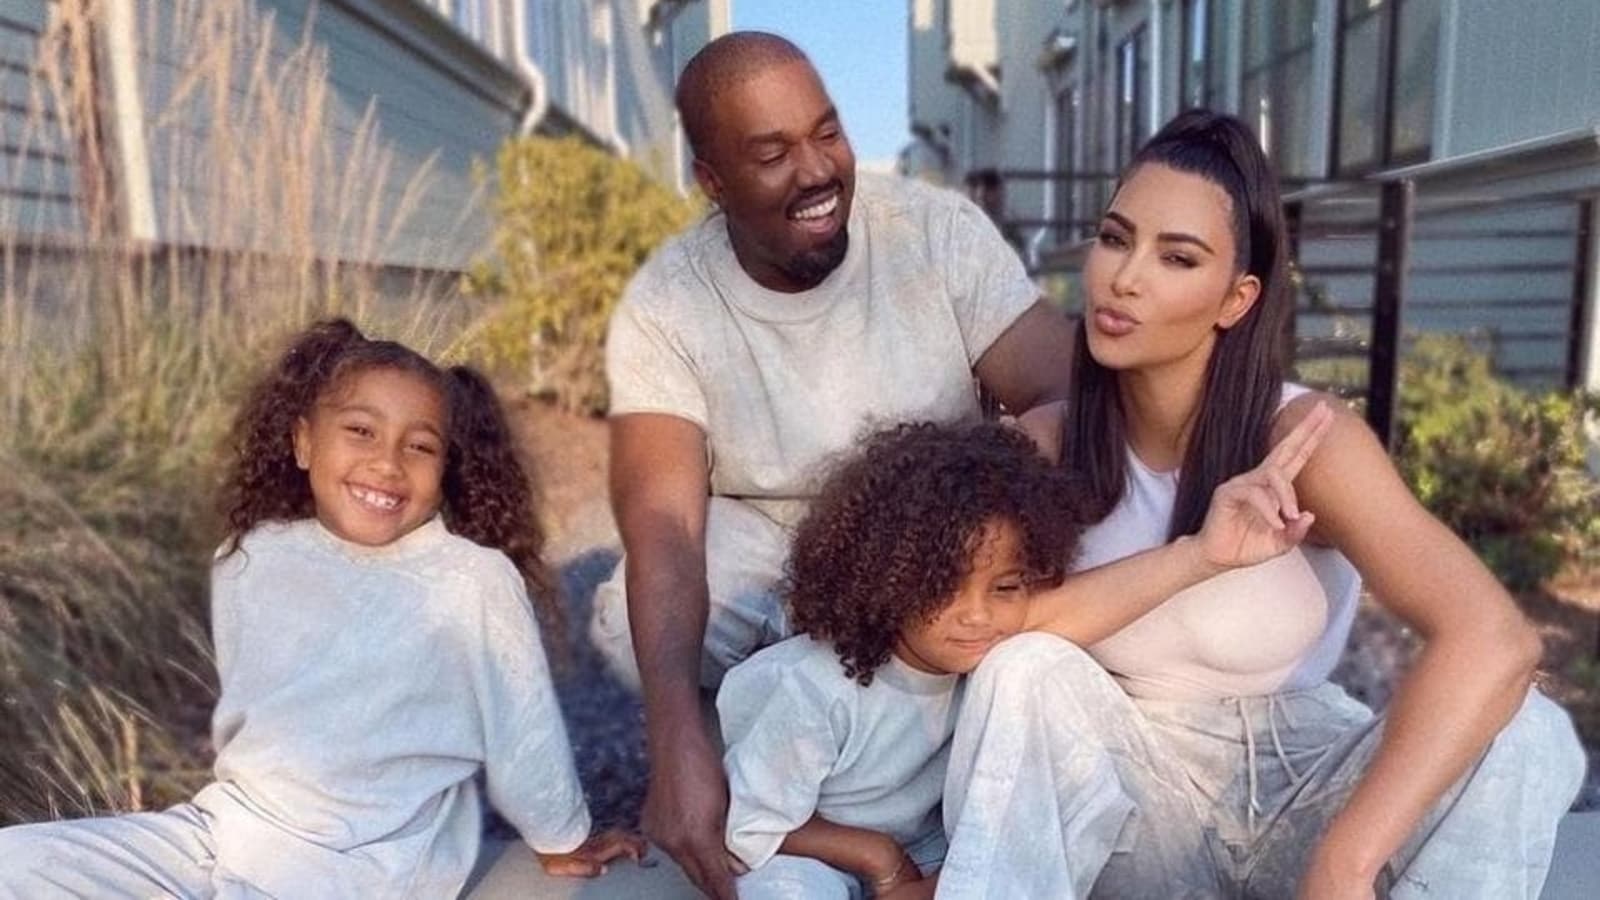 Kim Kardashian has ‘moved on’ from ex-husband Kanye West: ‘She’s grown a lot since split’